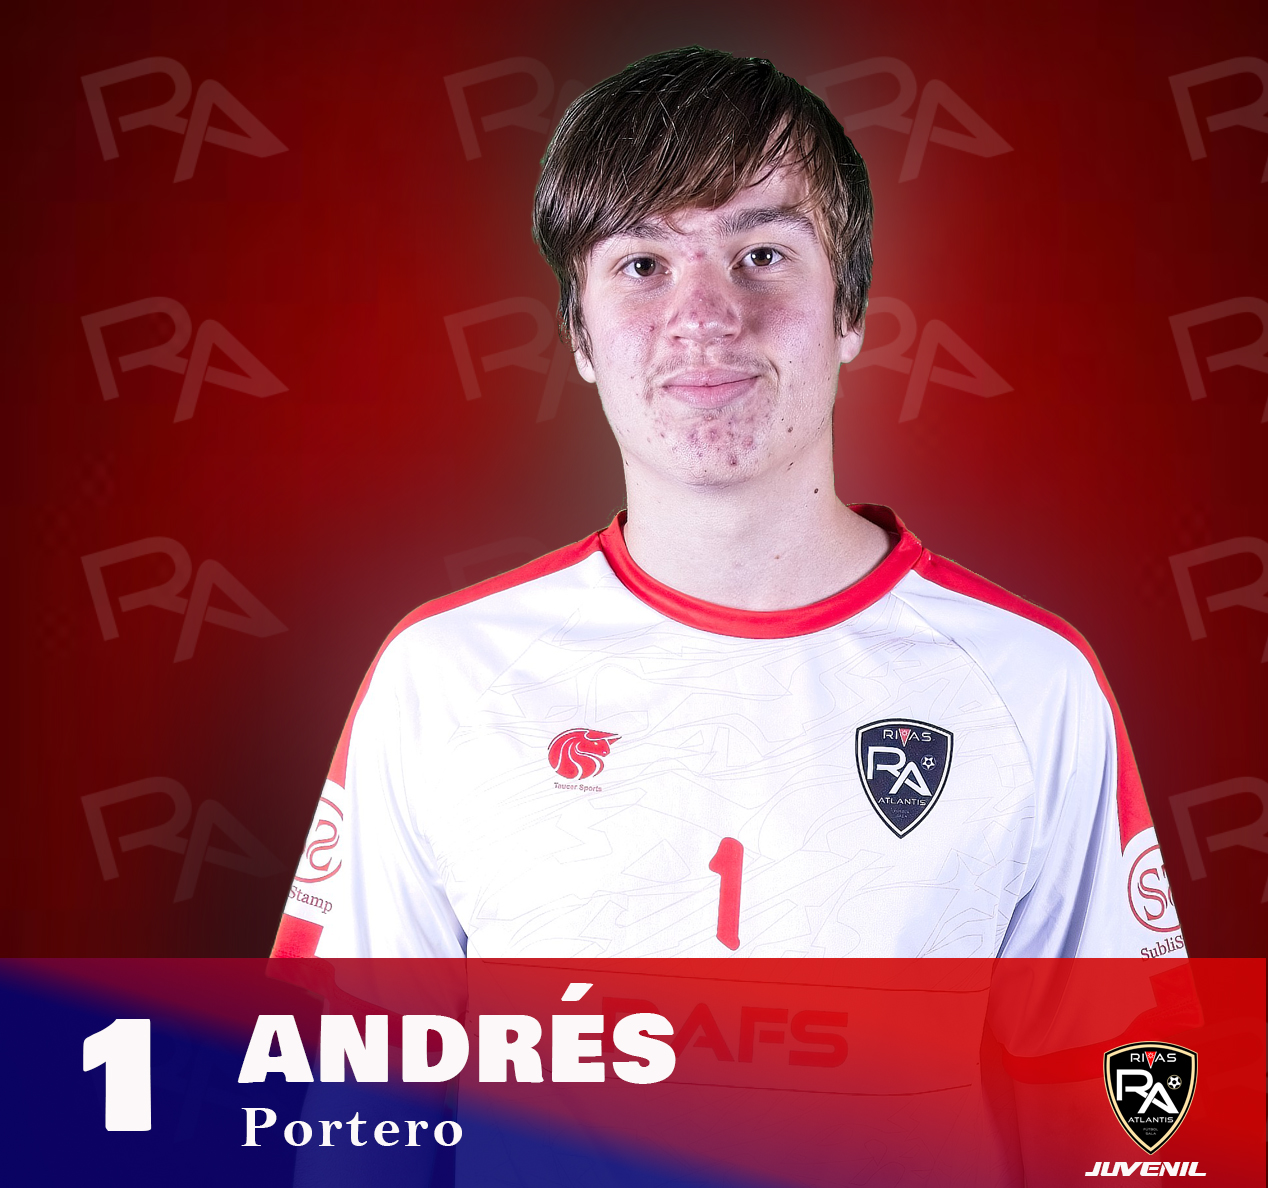 1ANDRES